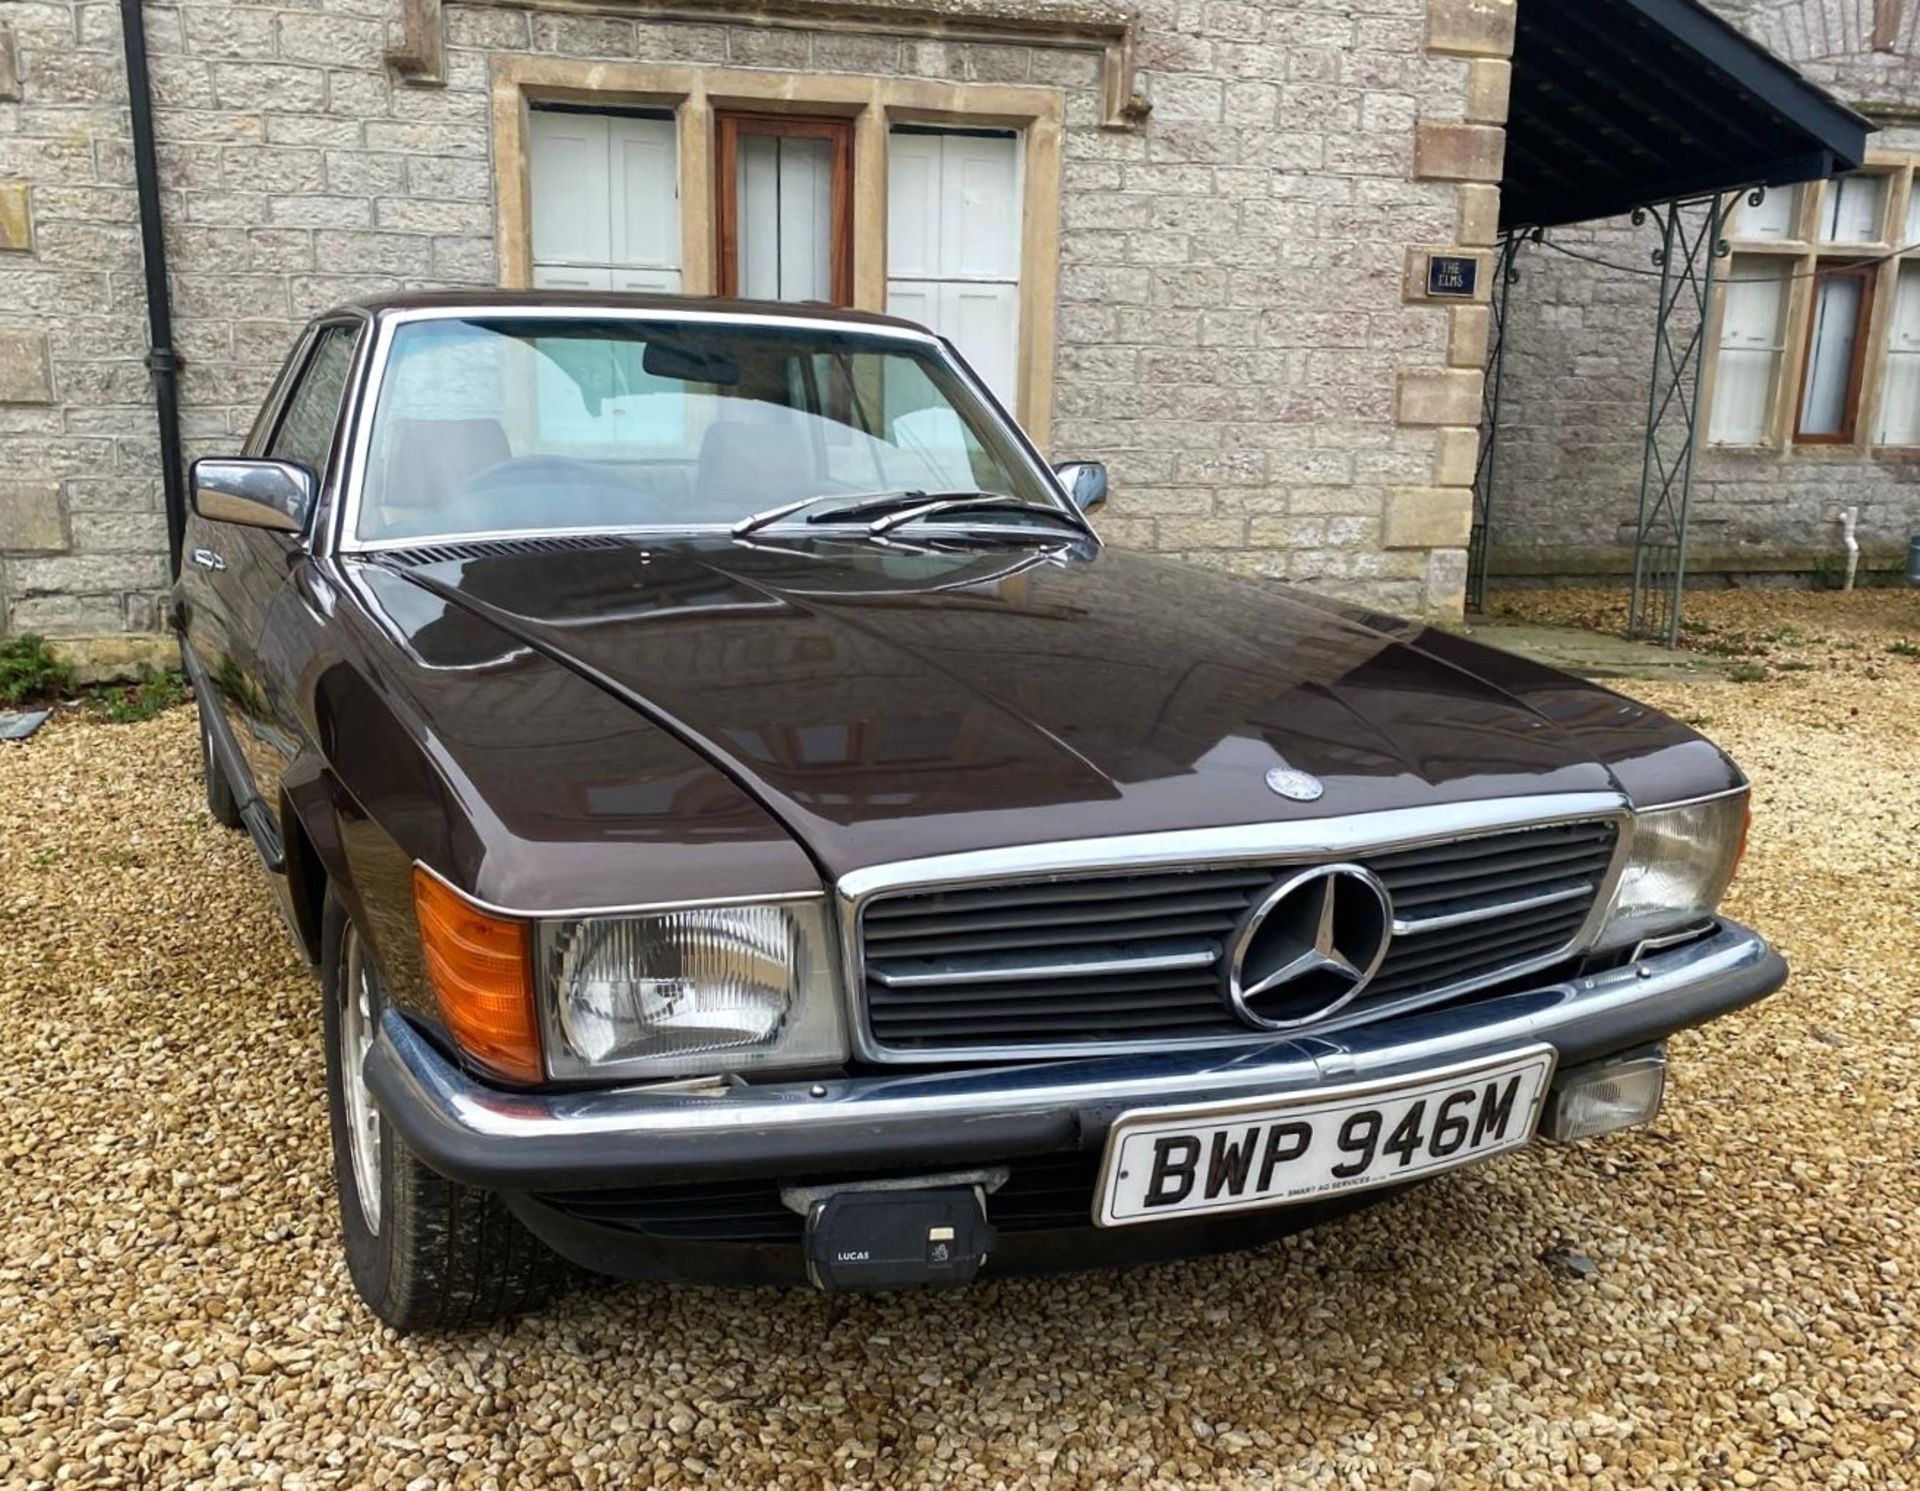 1980 MERCEDES-BENZ 380SLC Registration Number: BWP 946M Chassis Number: 107.025.22.000320 Recorded - Image 2 of 7